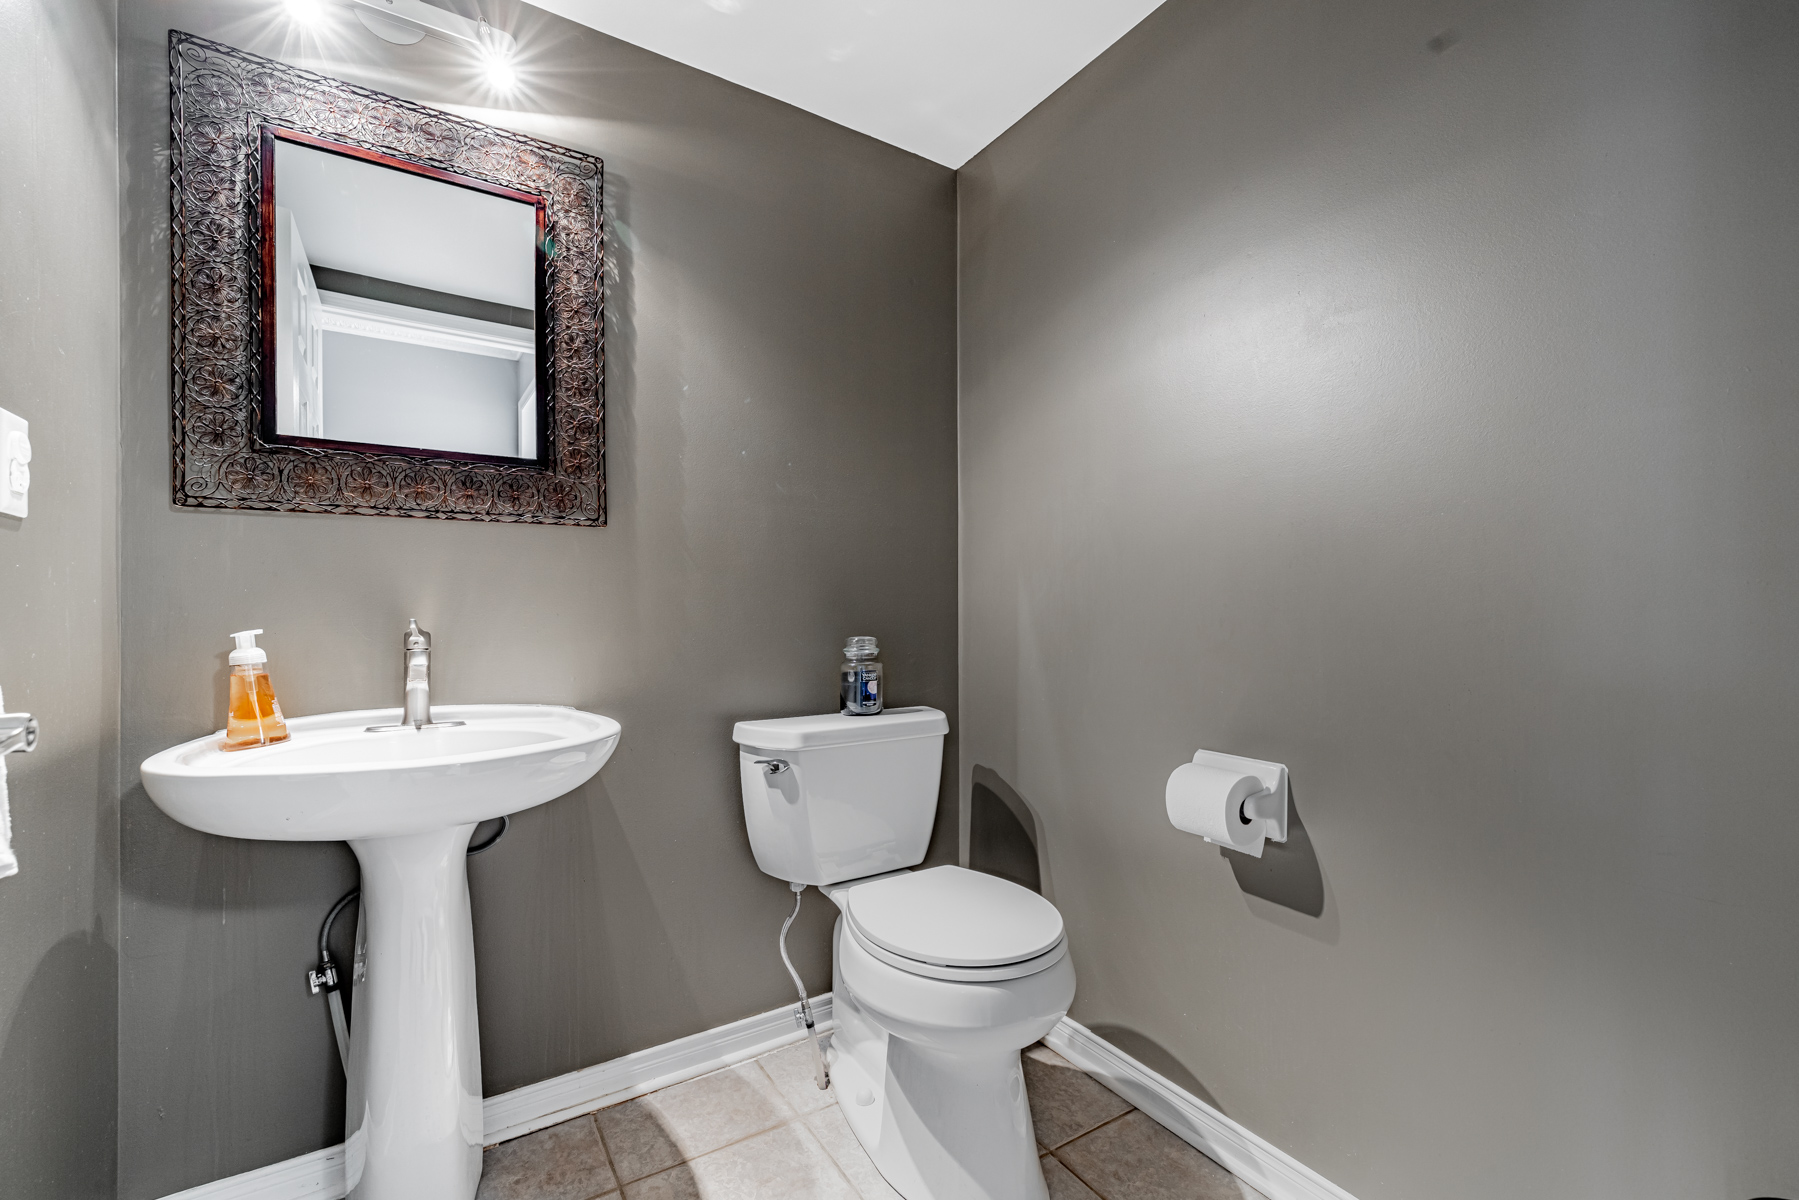 Powder room with dark gray walls and thick mirror frame – 77 Schouten Cres.